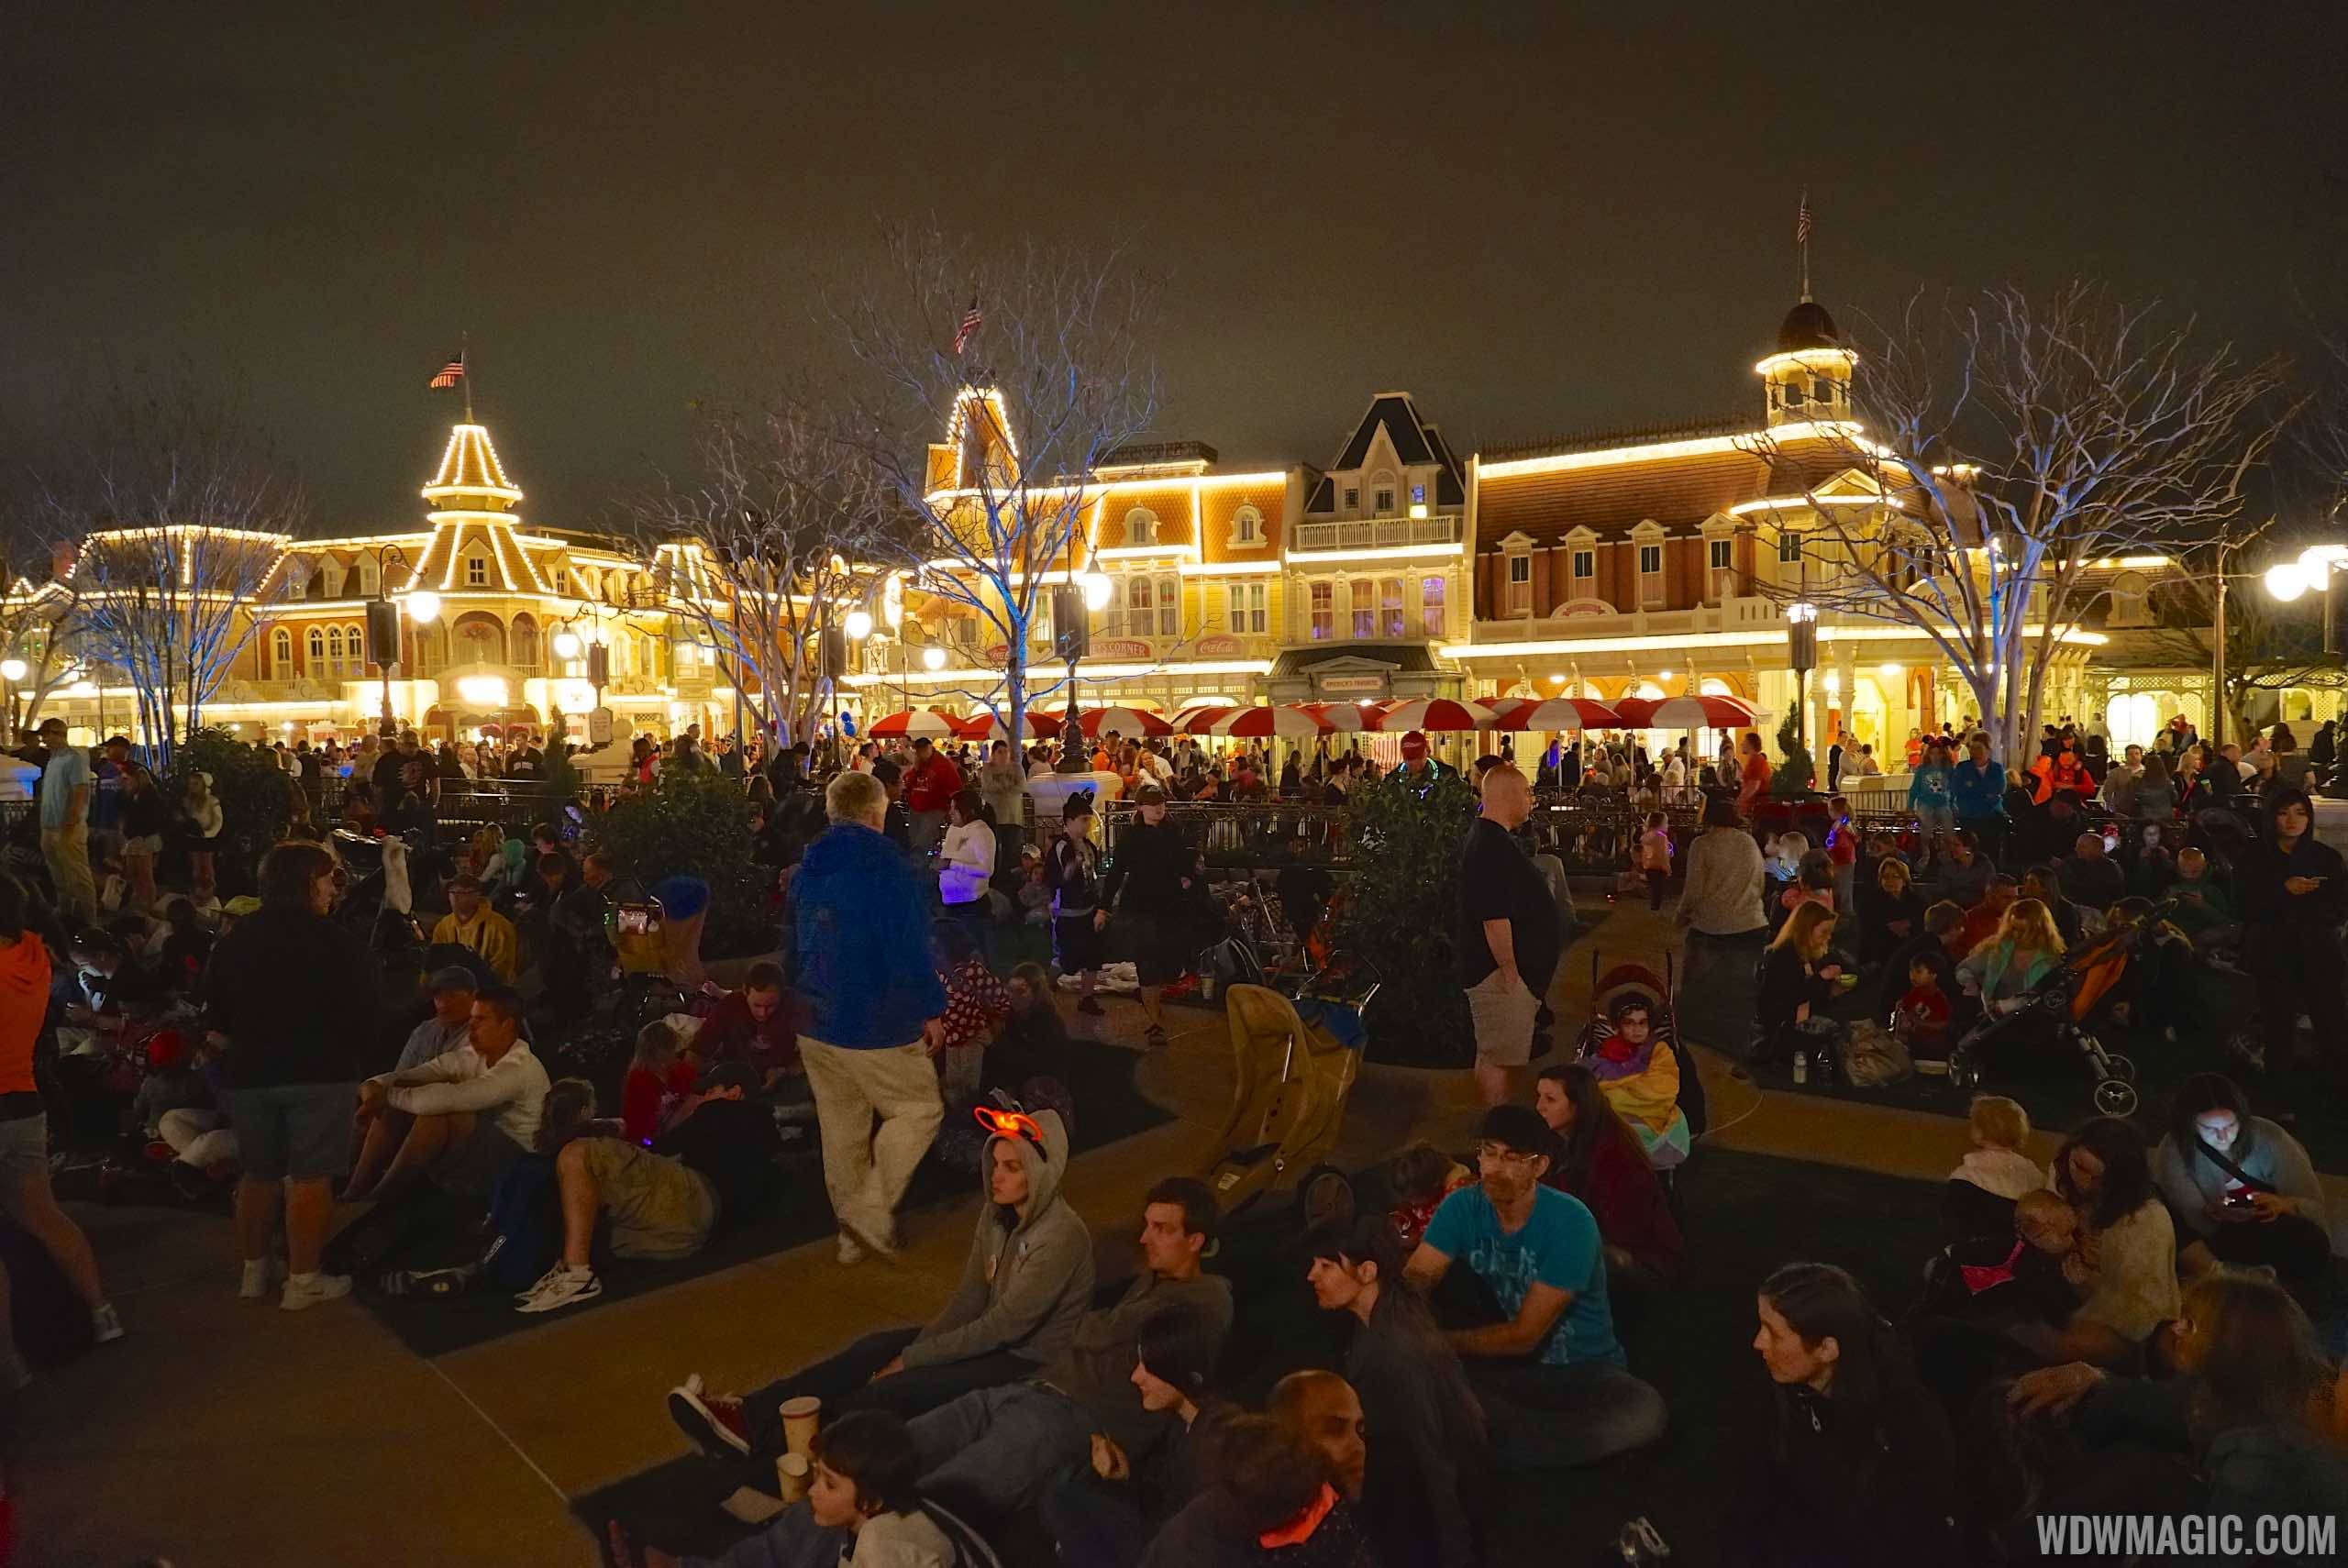 PHOTOS - After-dark in the new Main Street Plaza Gardens at the Magic Kingdom